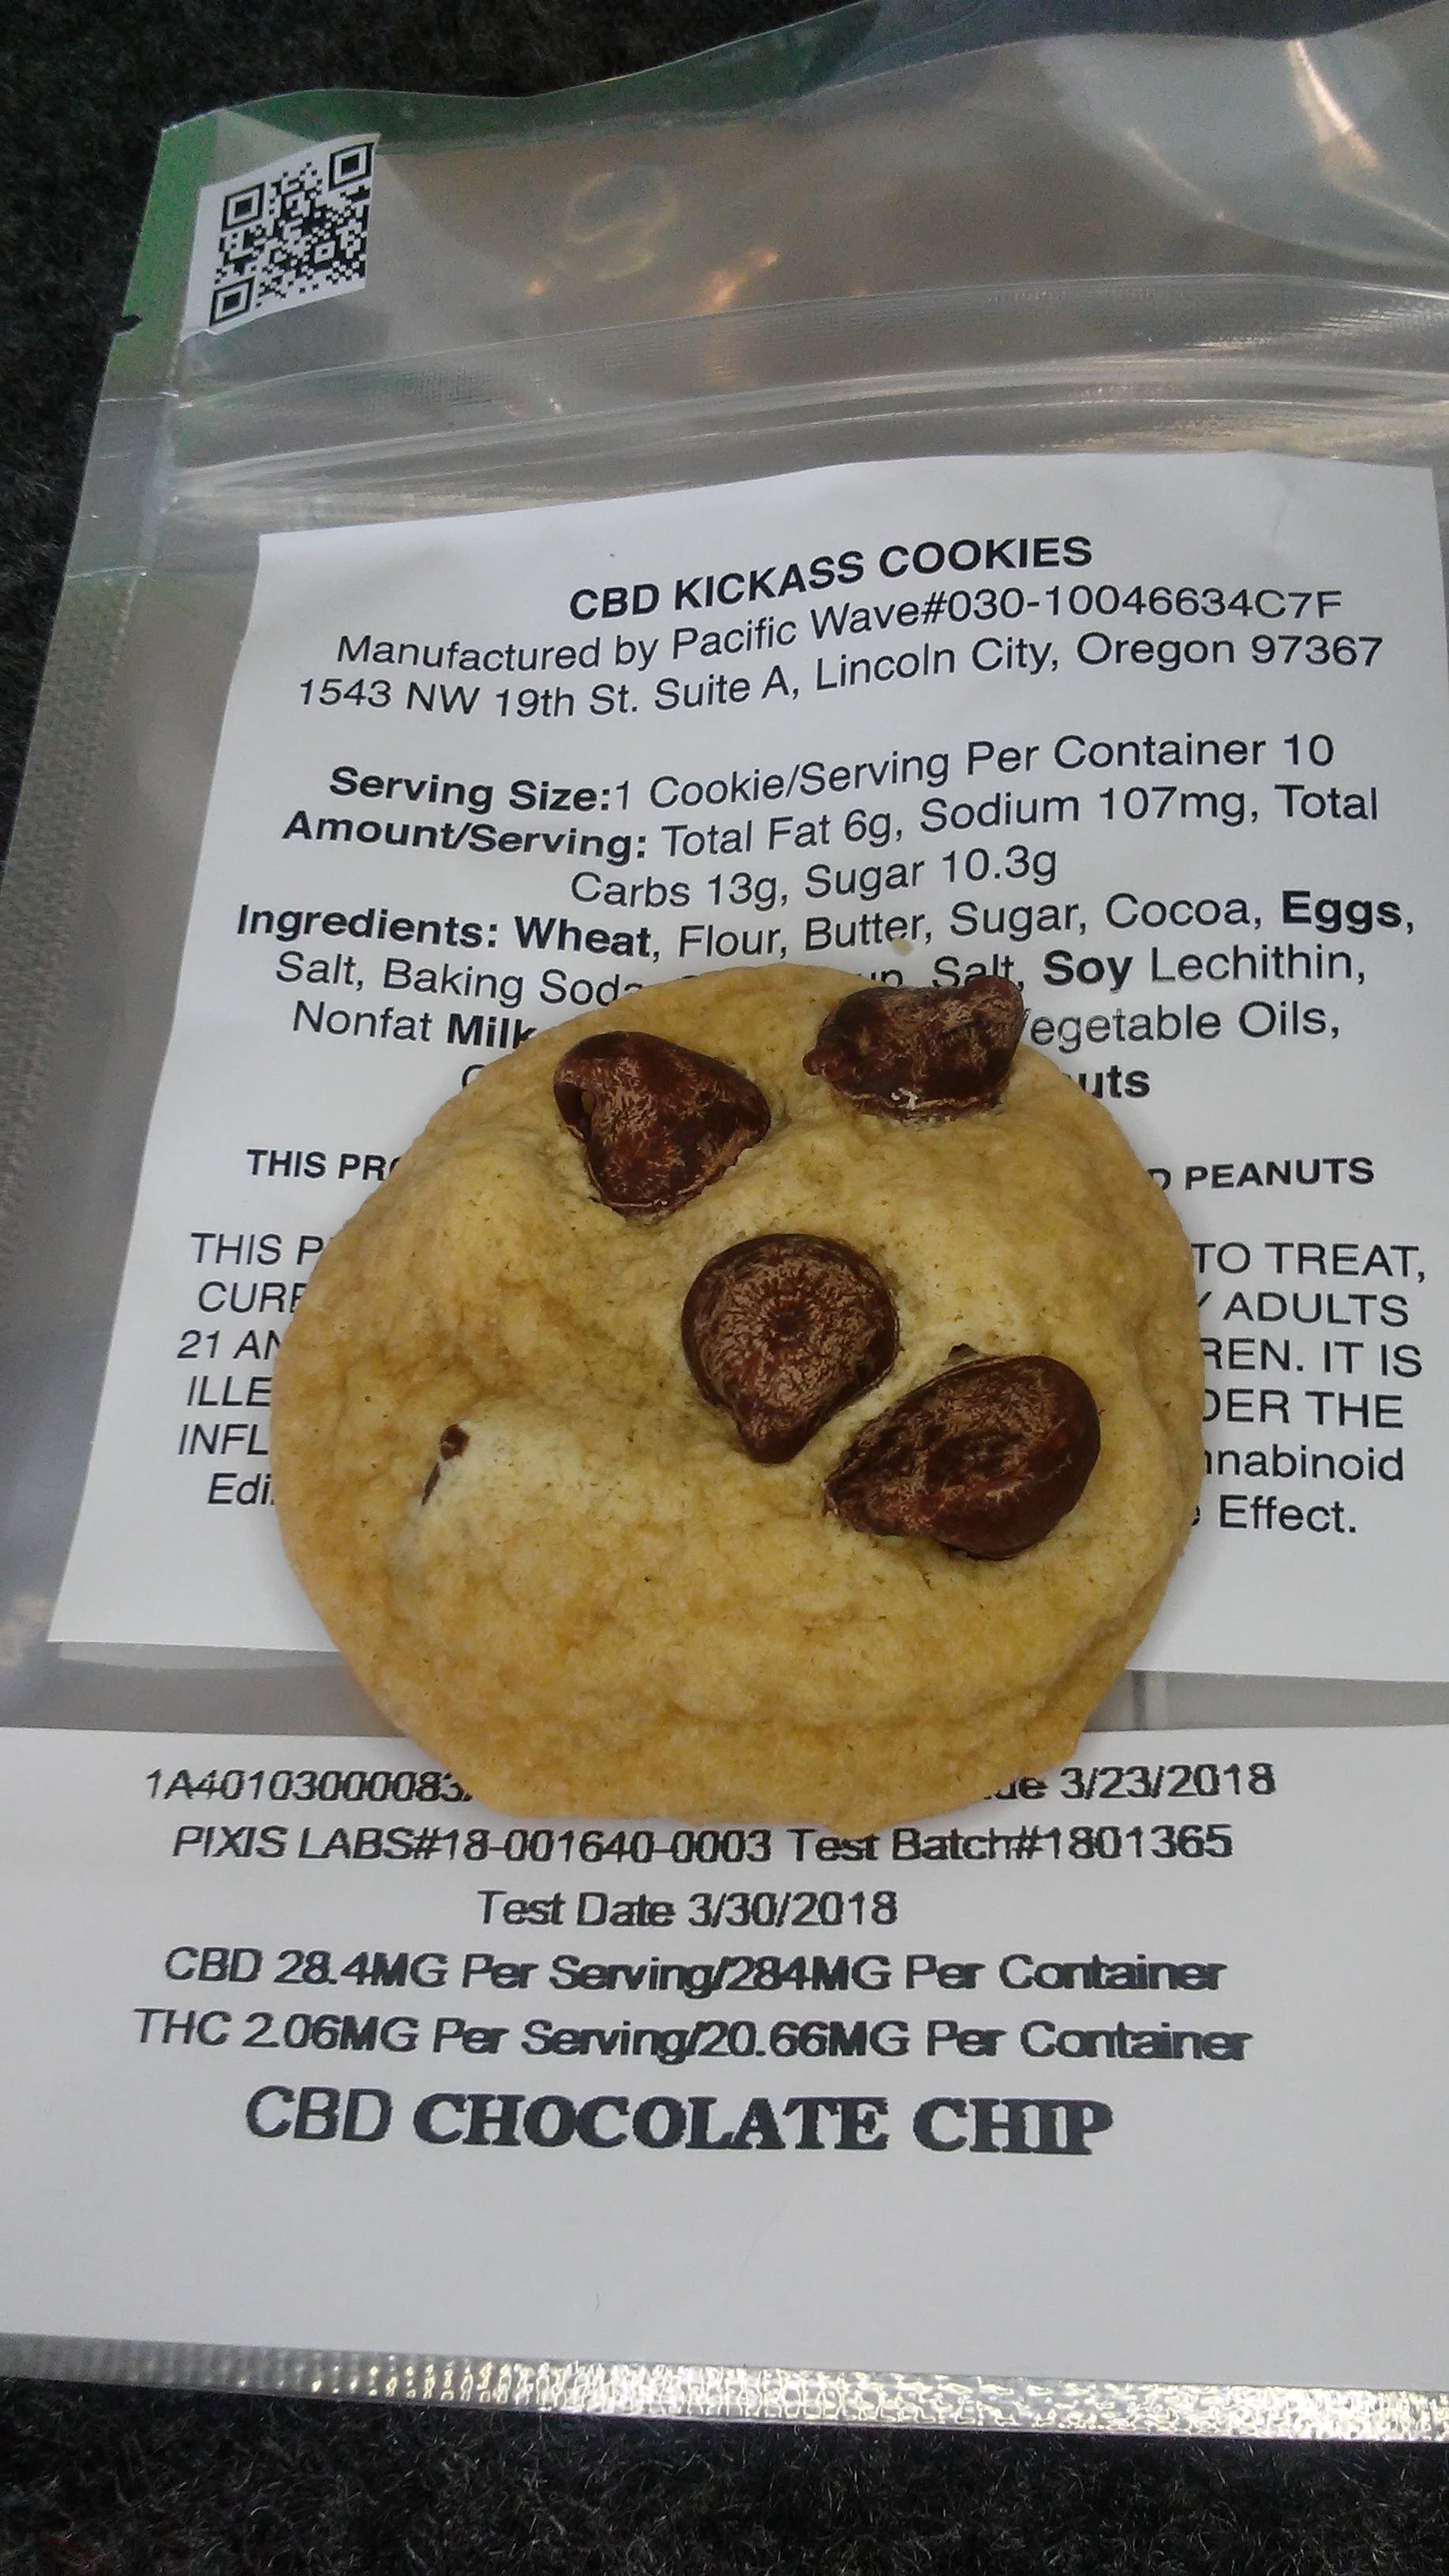 edible-pacific-wave-cbd-chocolate-chip-cookie